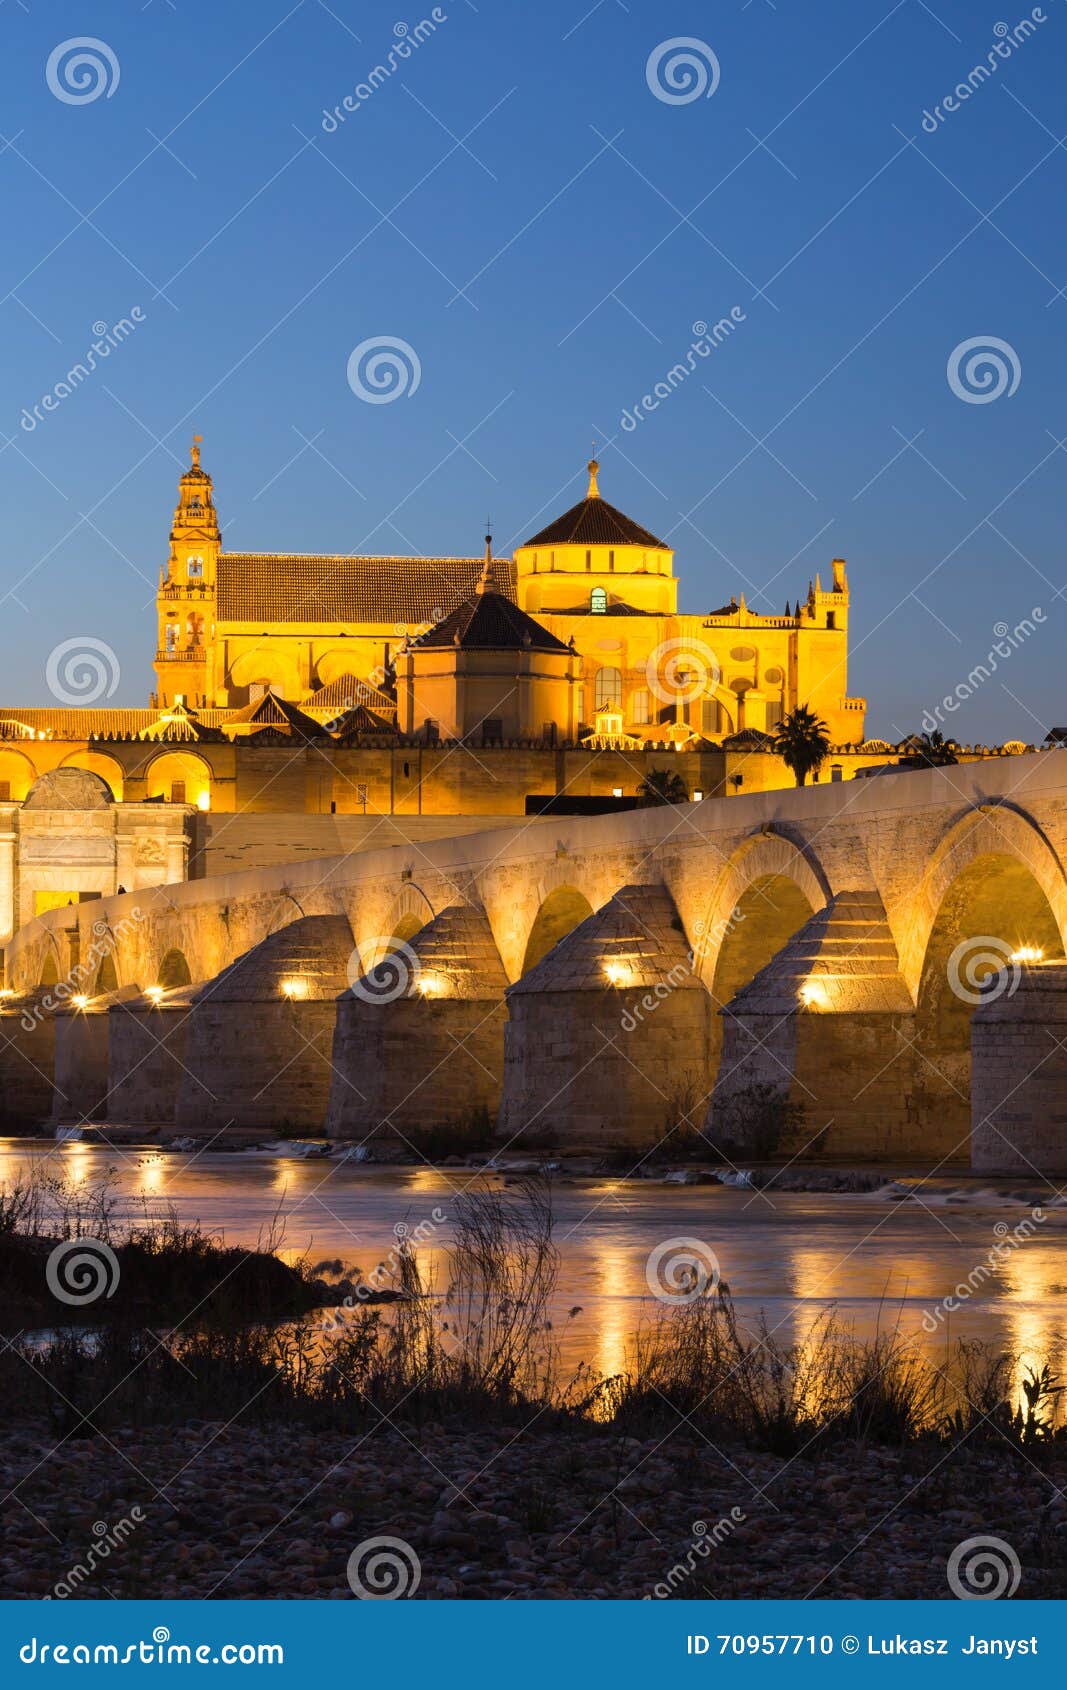 night view of mezquita-catedral and puente romano - mosque-cathedral and the roman bridge in cordoba, andalusia, spain